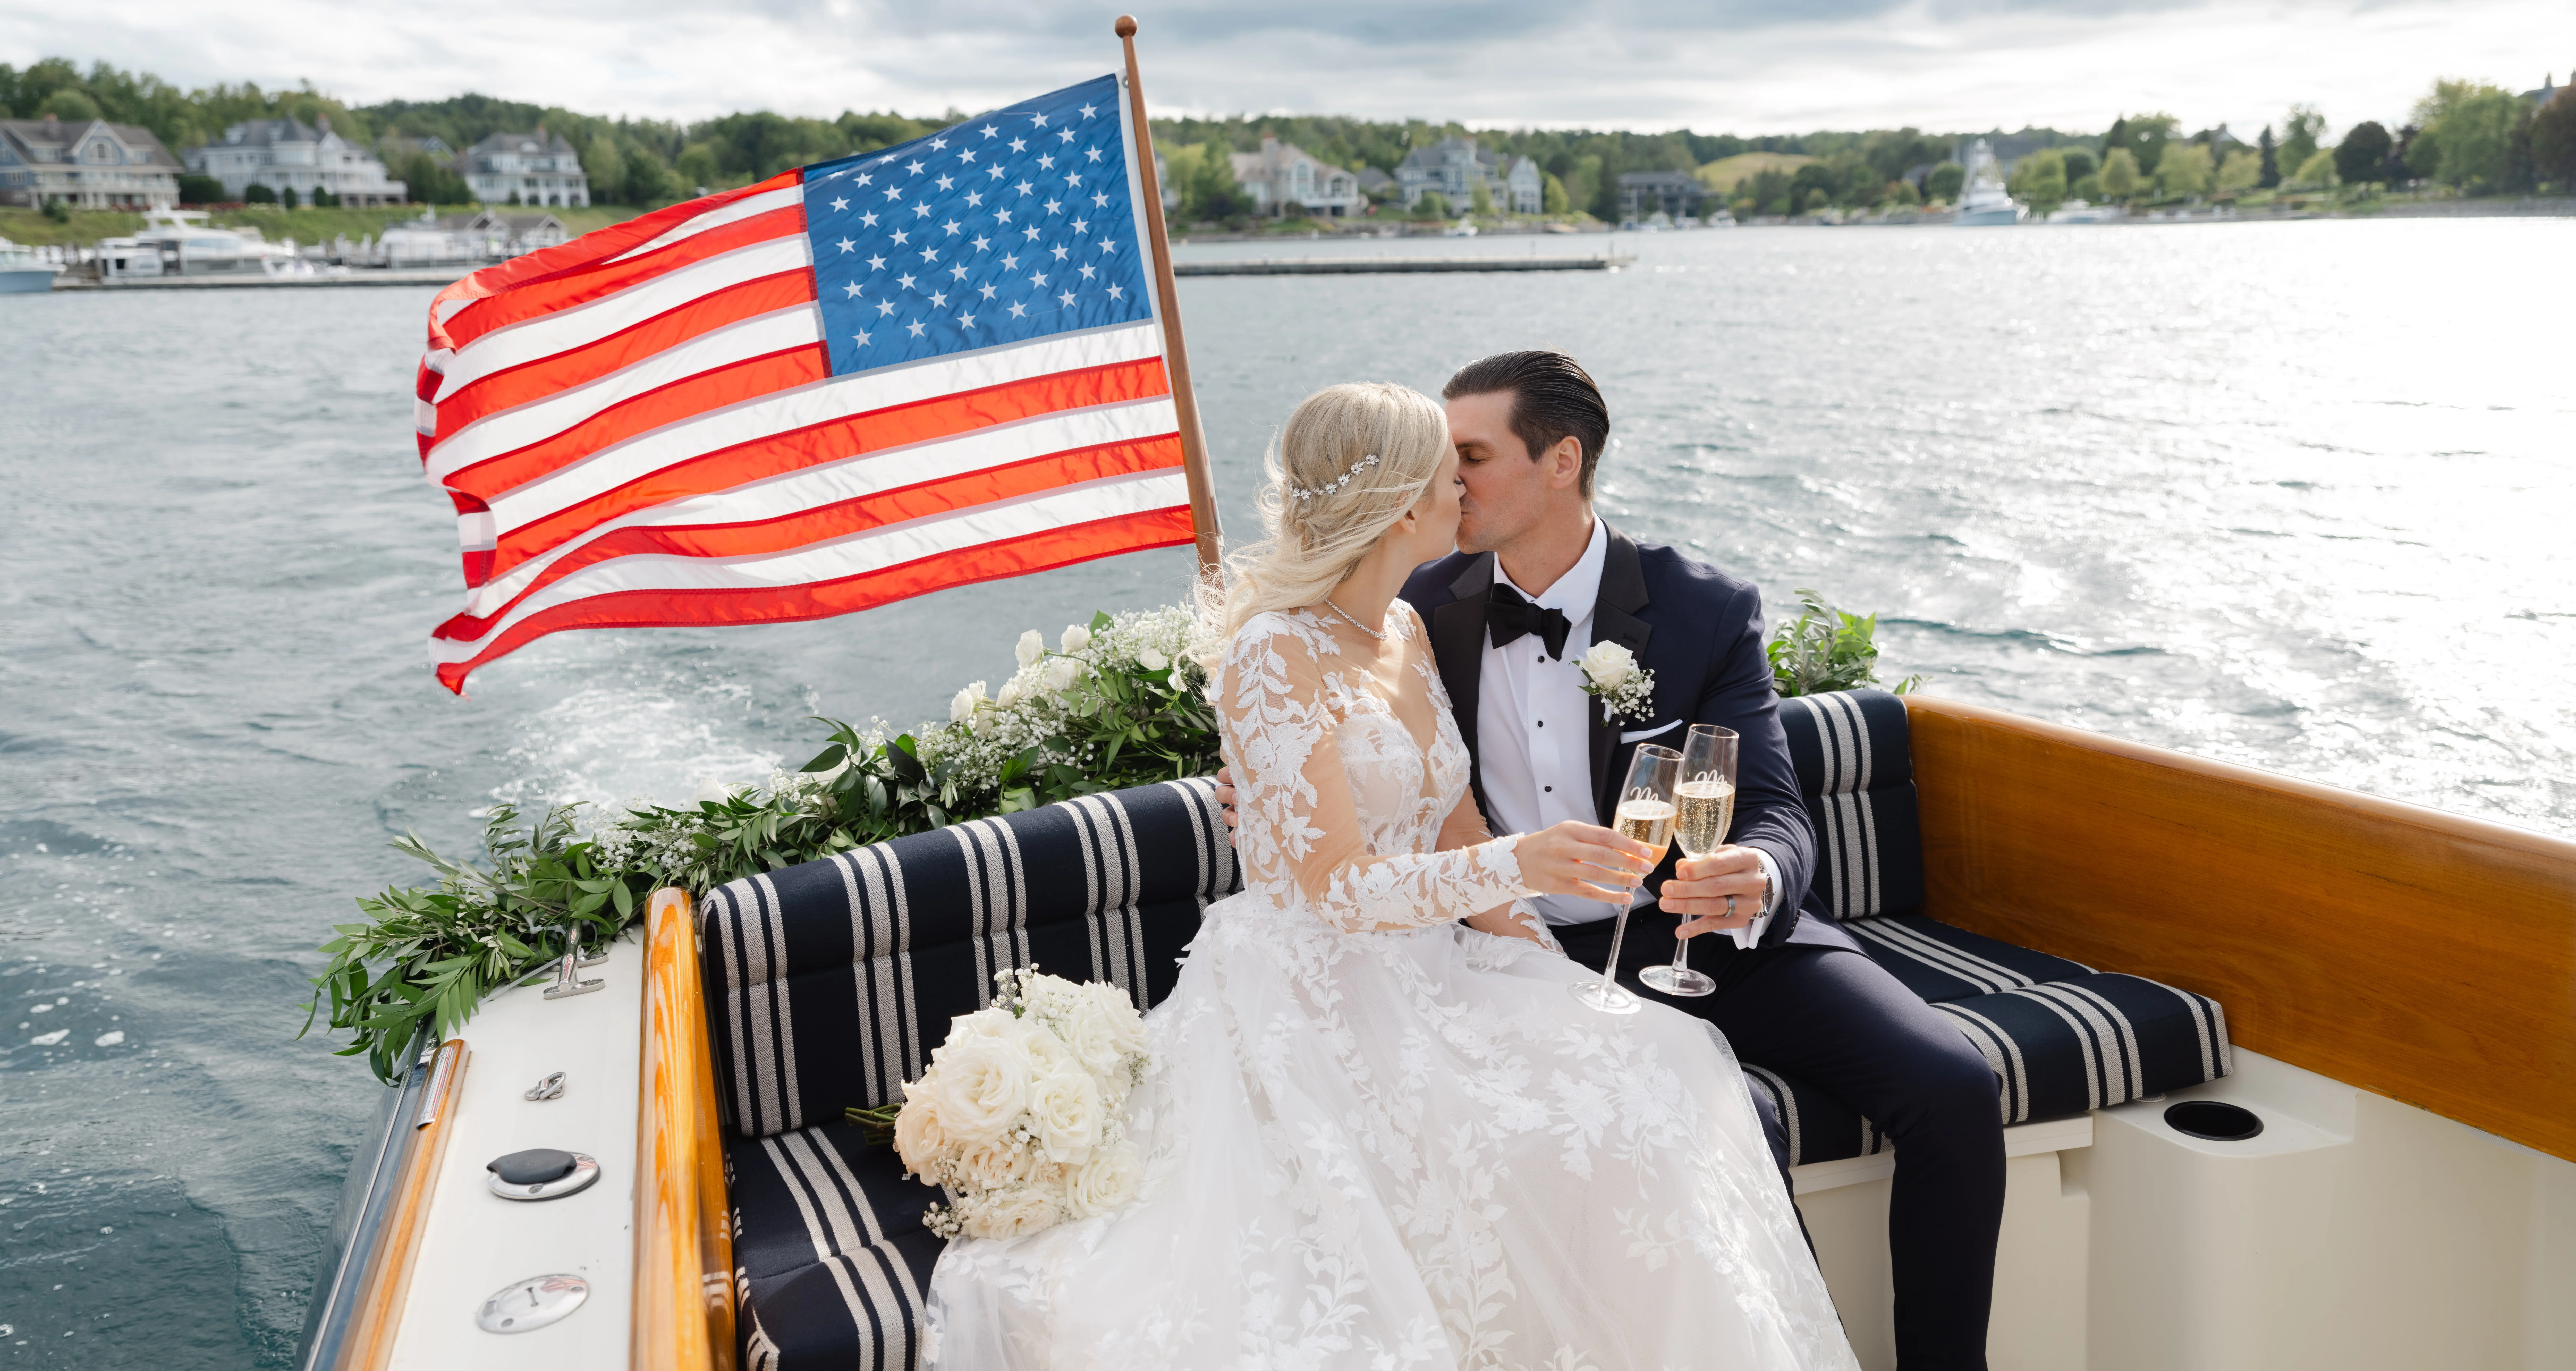 bride and groom sitting on a boat with an american flag behind them while holding drinks